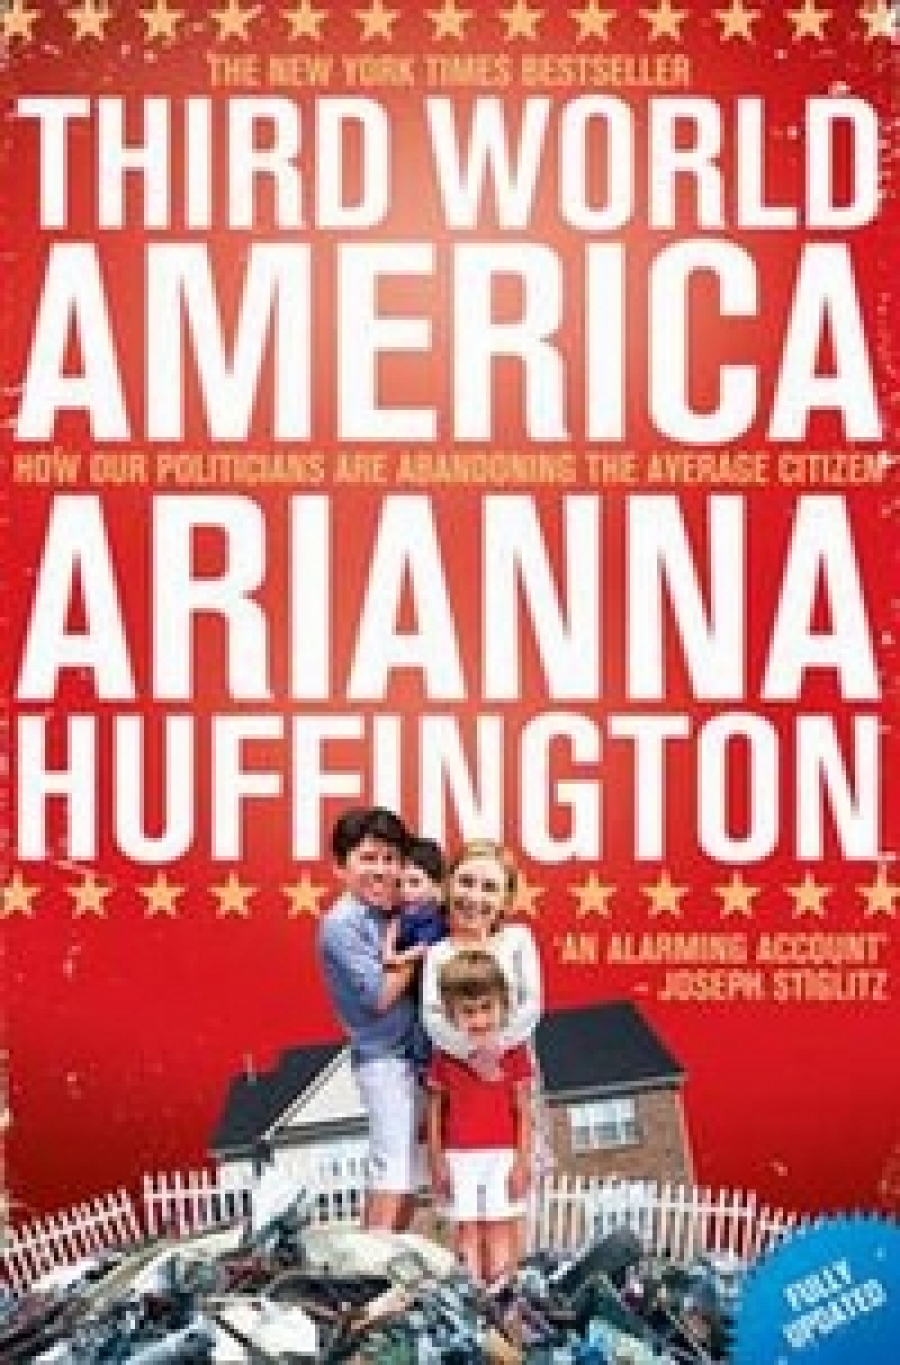 Huffington, Arianna Third World America: How Our Politicians are Abandoning the Average Citizen 